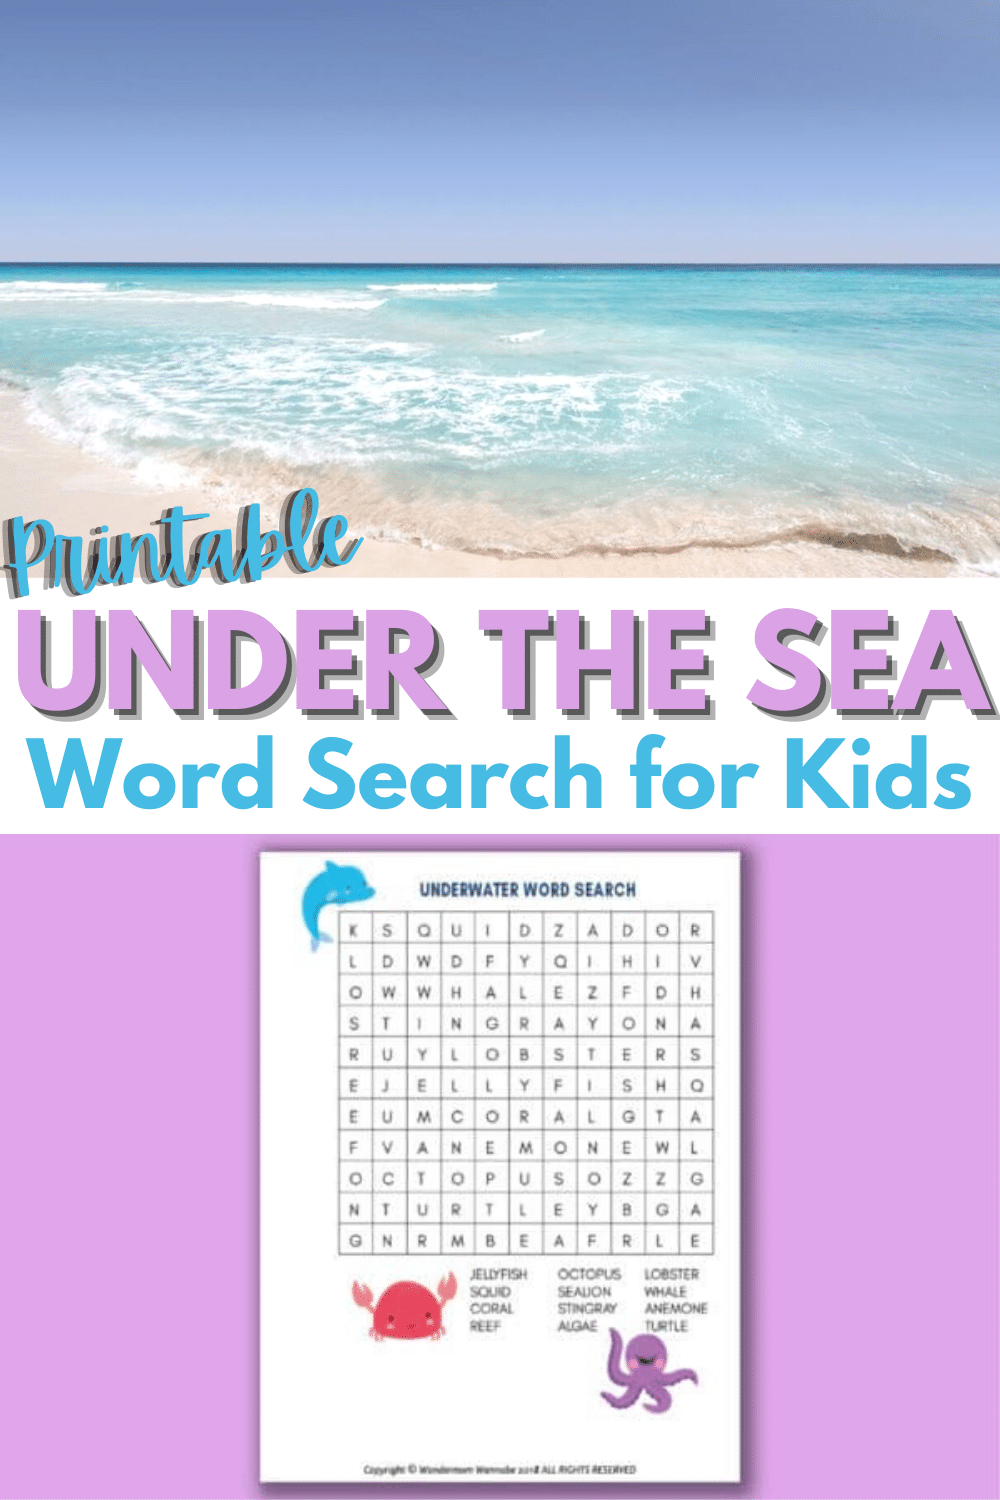 This under the sea word search for kids will help kids learn words associated with the ocean. Perfect fun printable activity for ocean-loving children. #underthesea #wordsearch #printables via @wondermomwannab